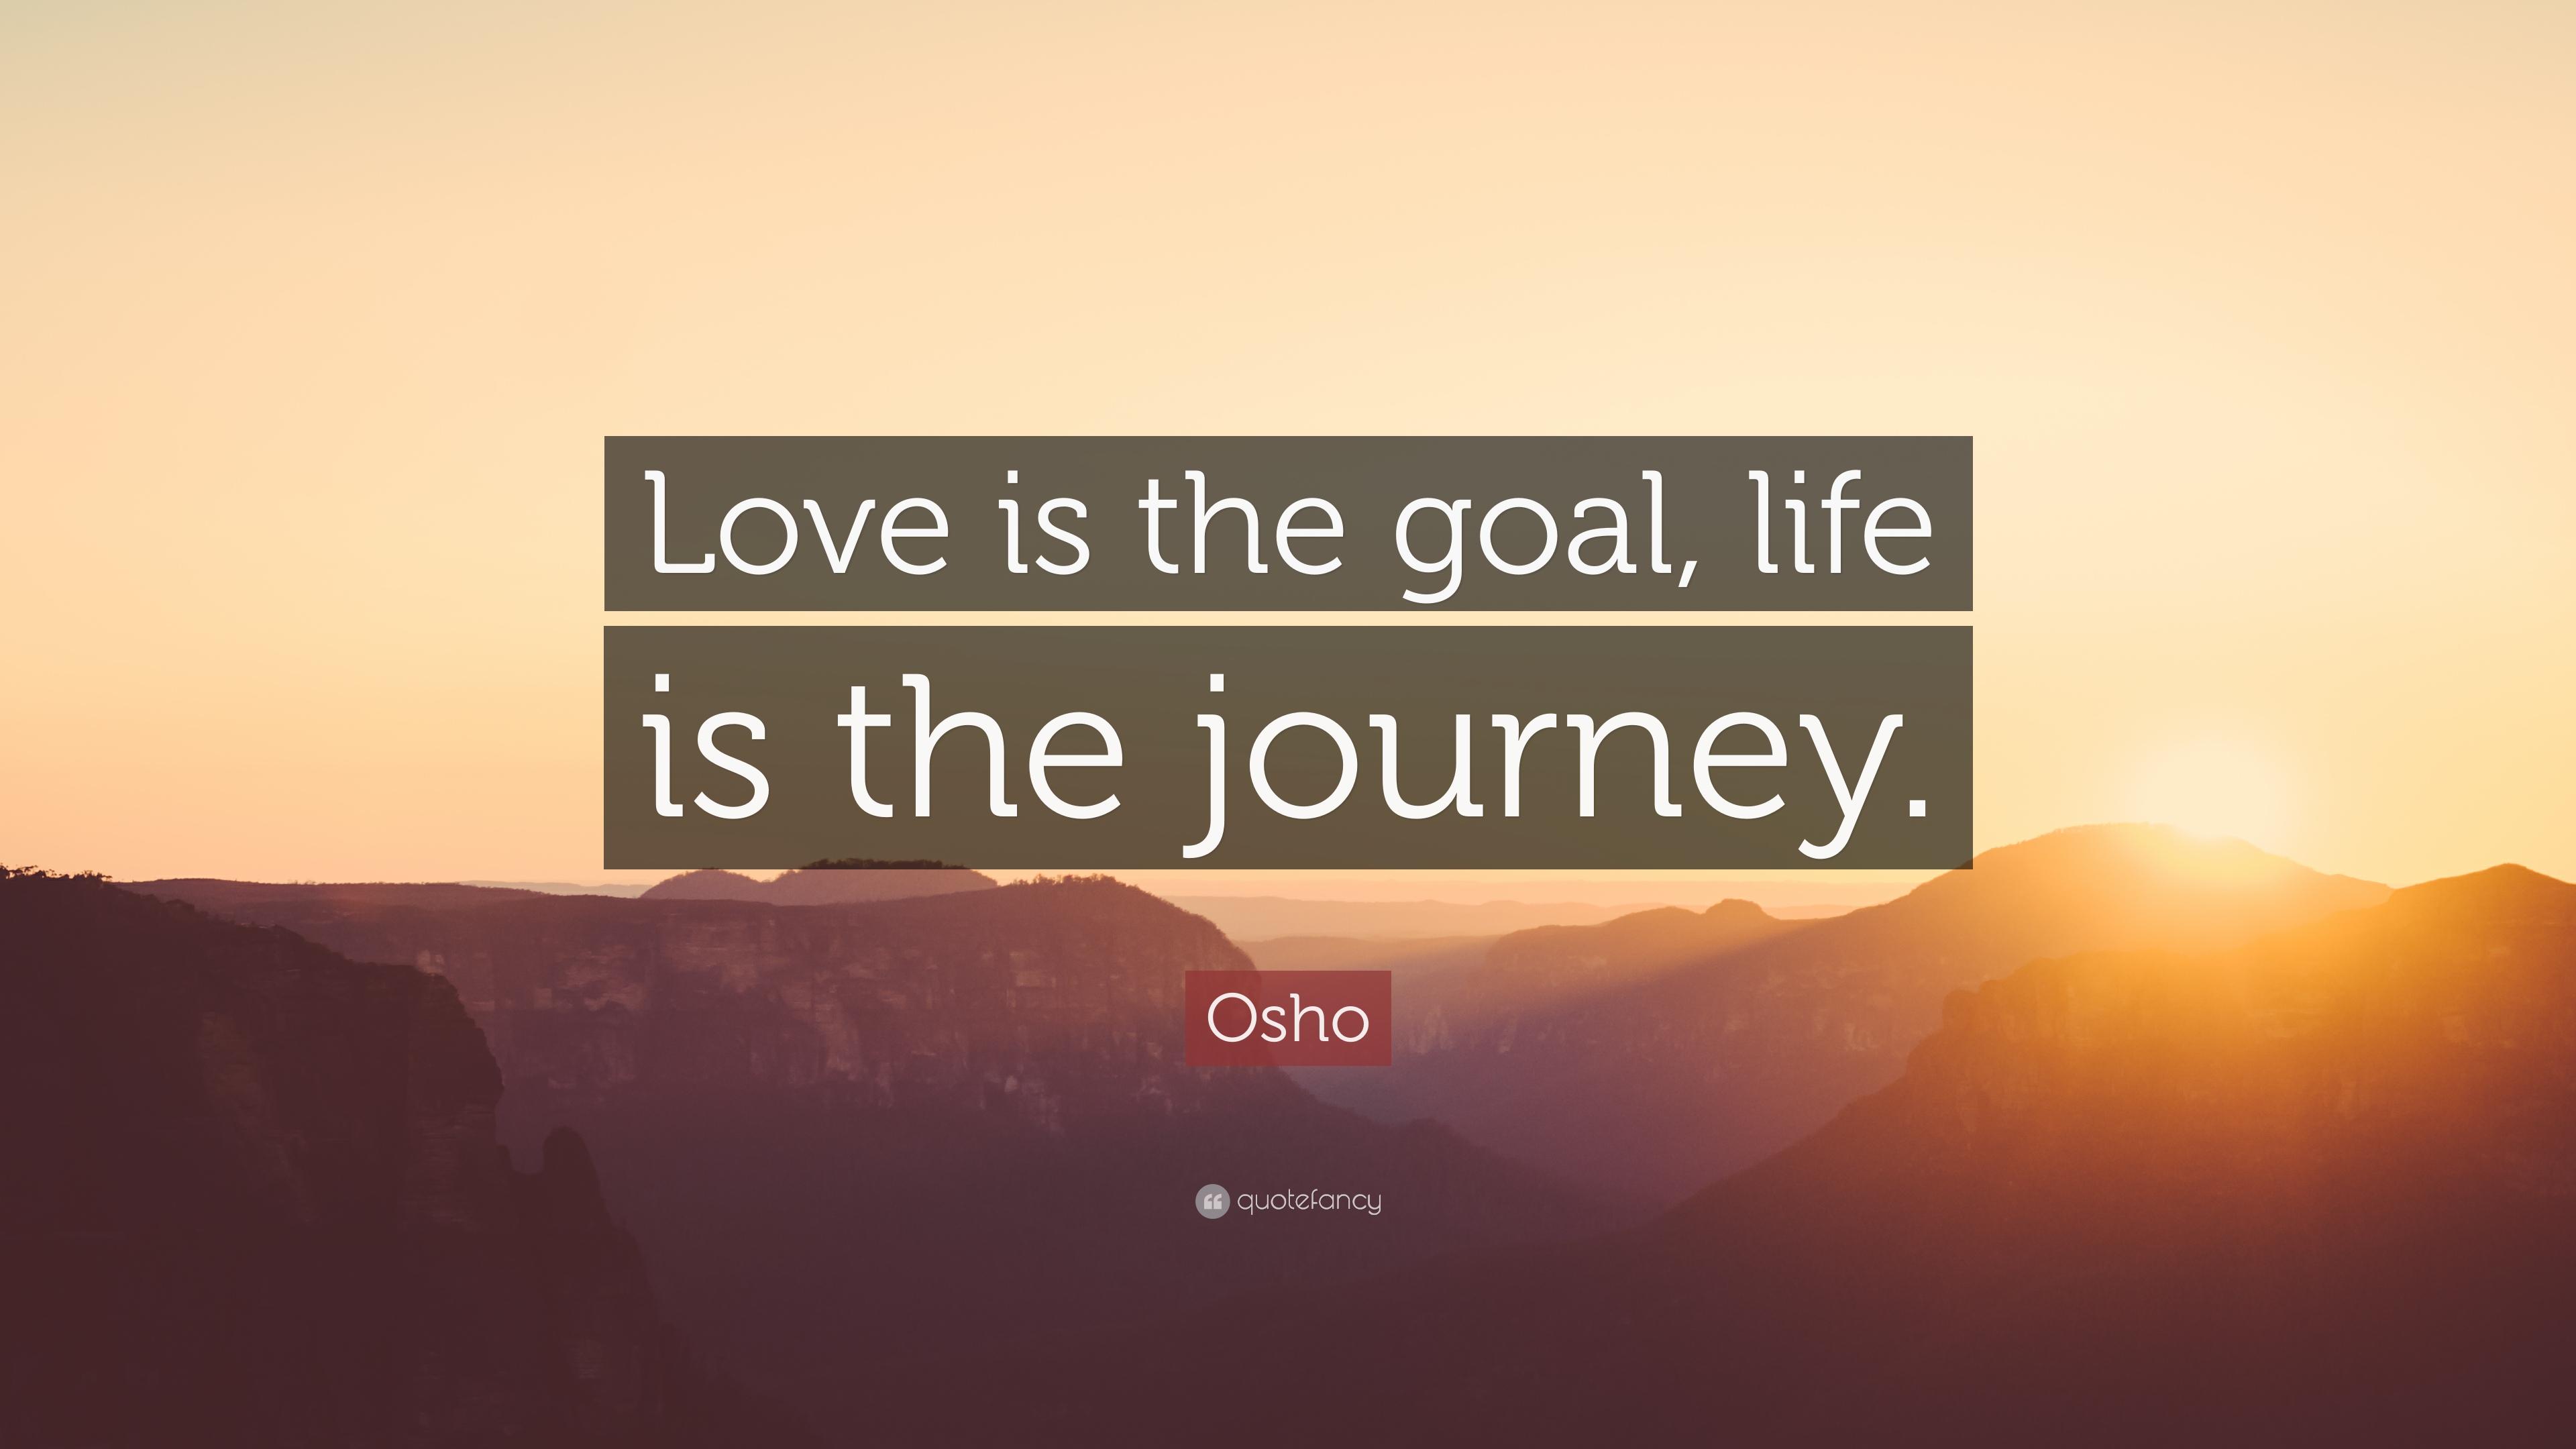 Purpose Of Life Is To Love Quote With Osho The Goal Journey 12.